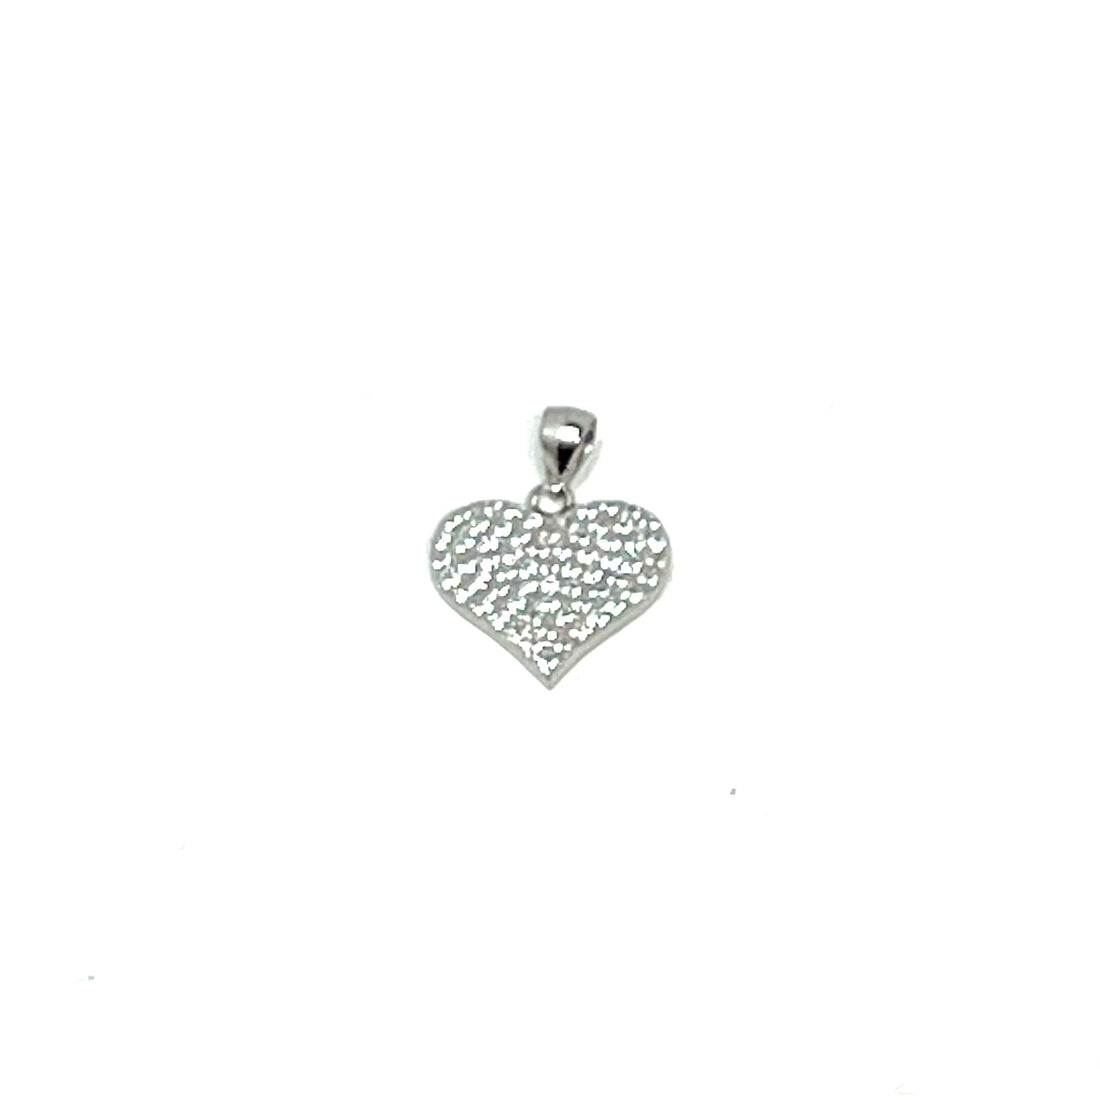 Charming Pave Heart Charm in Silver